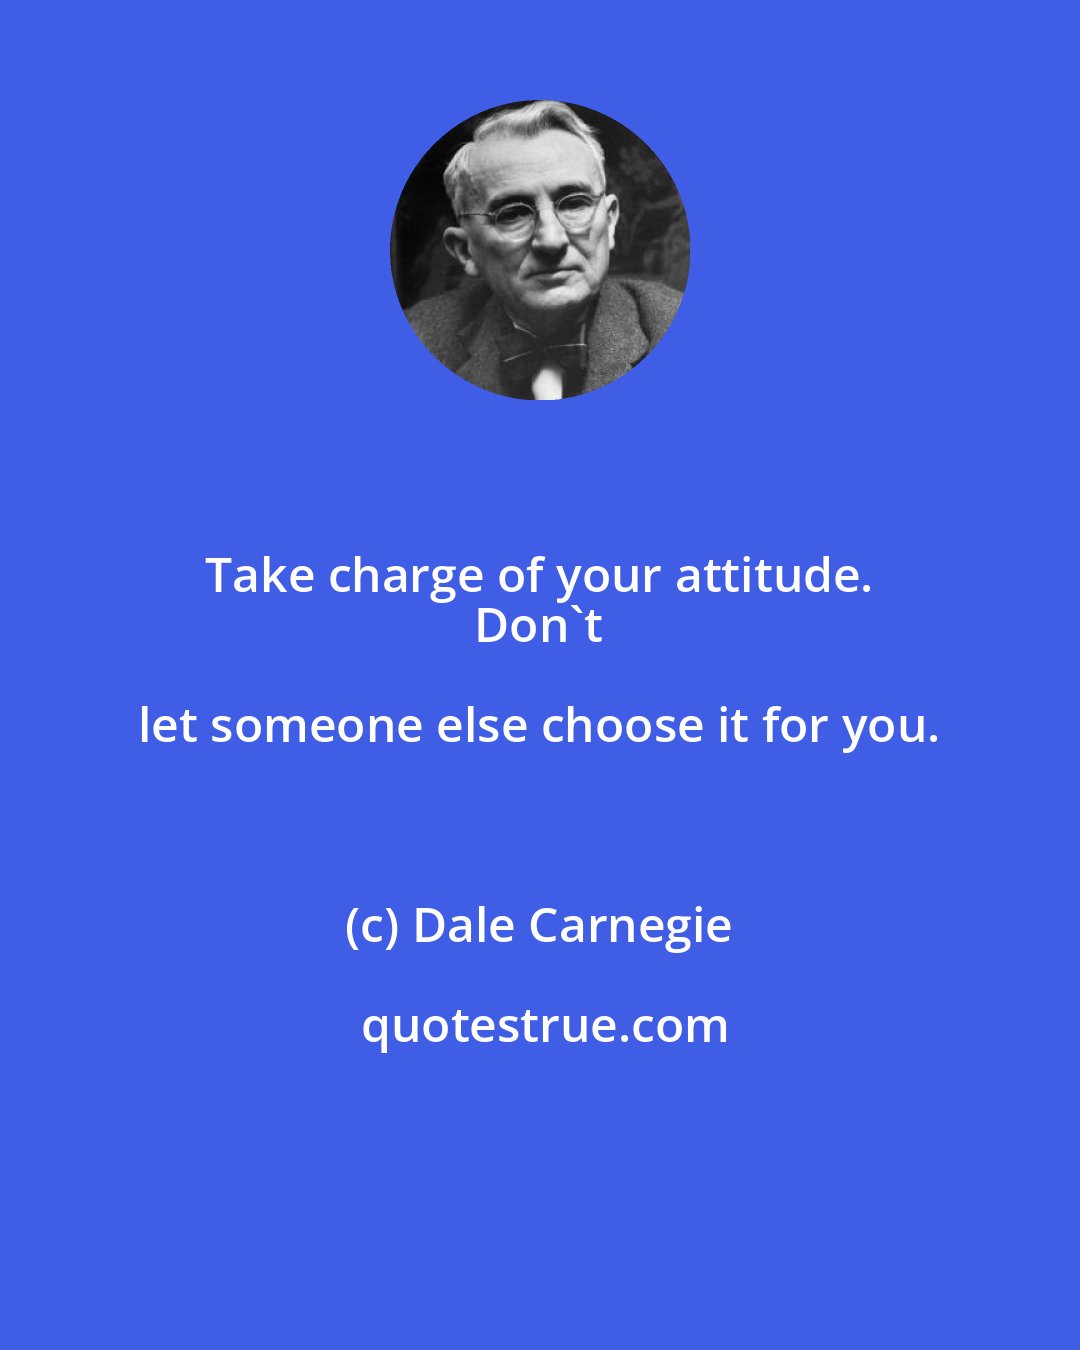 Dale Carnegie: Take charge of your attitude. 
 Don't let someone else choose it for you.